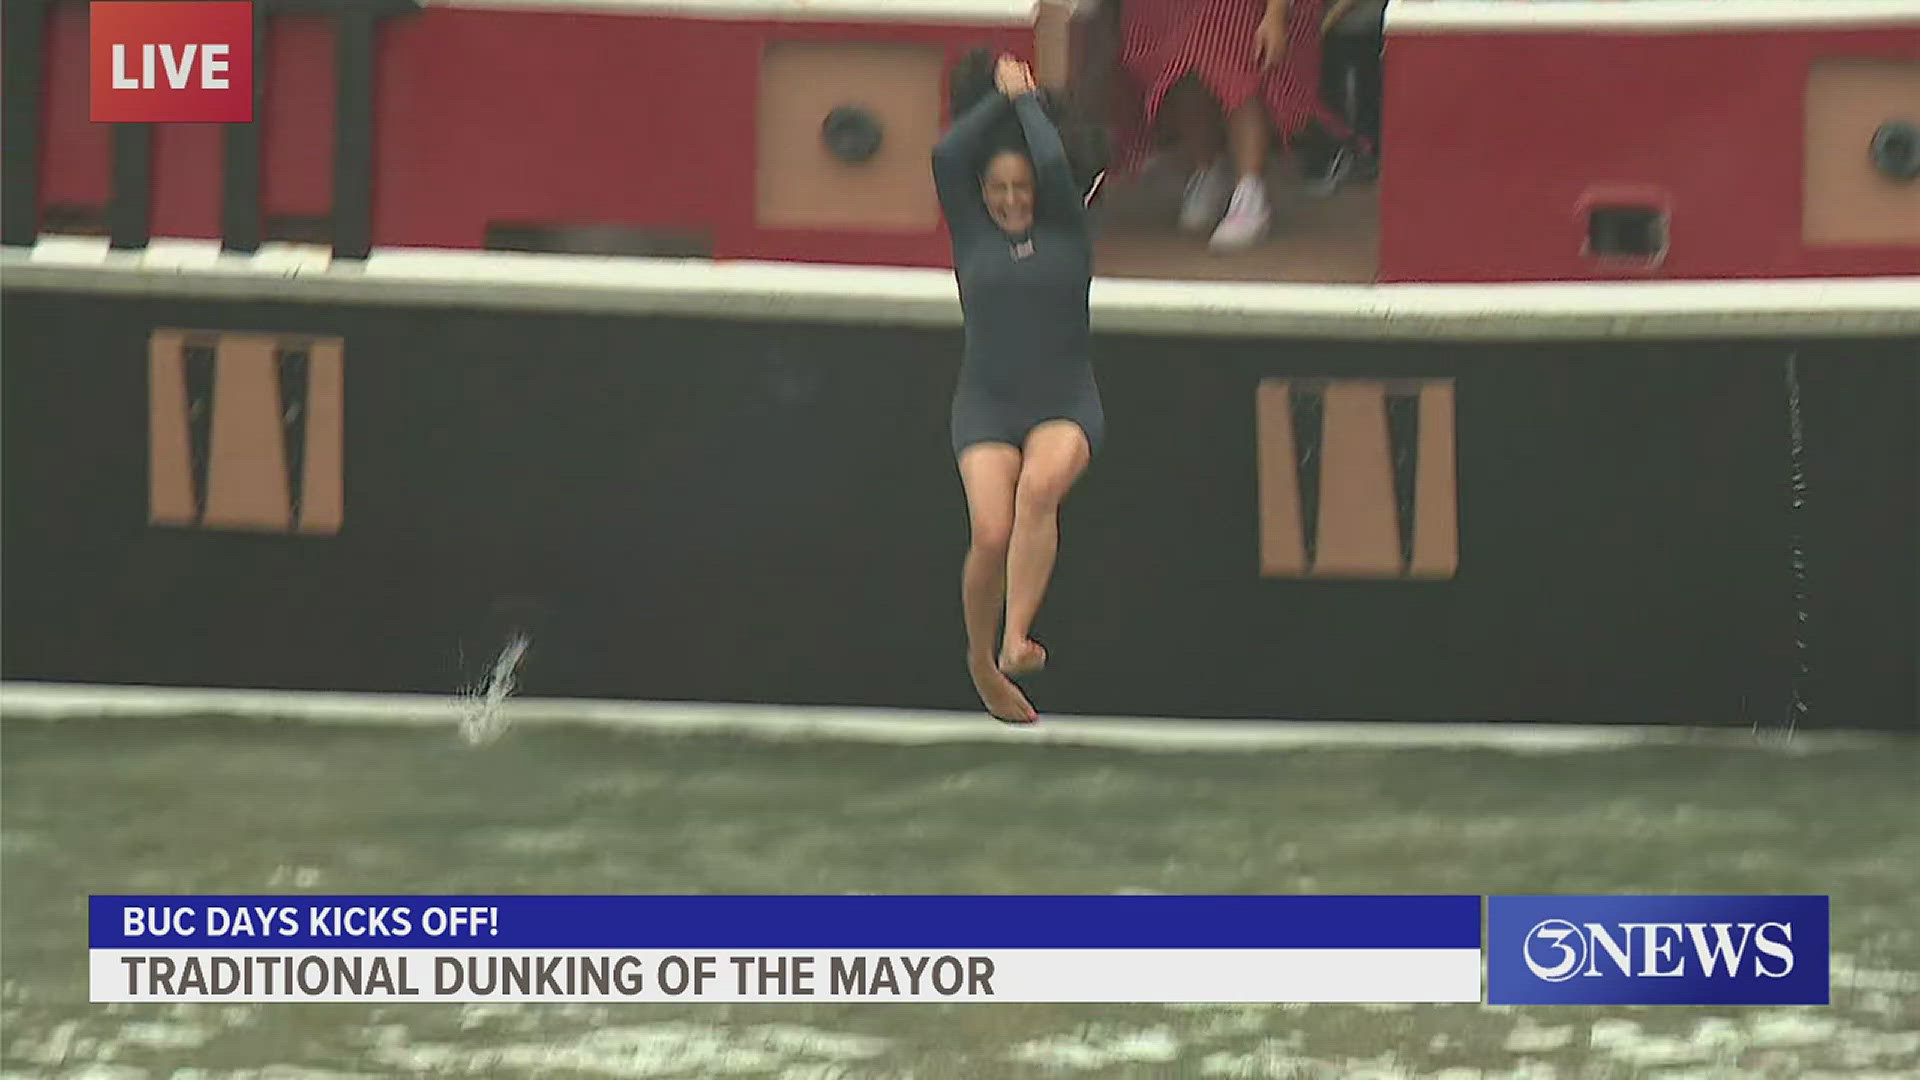 The 'dunking of the mayor' is a tradition that dates back to 1938! The mayor told 3NEWS' Bill Churchwell that she was just a tad nervous about the splash Thursday.